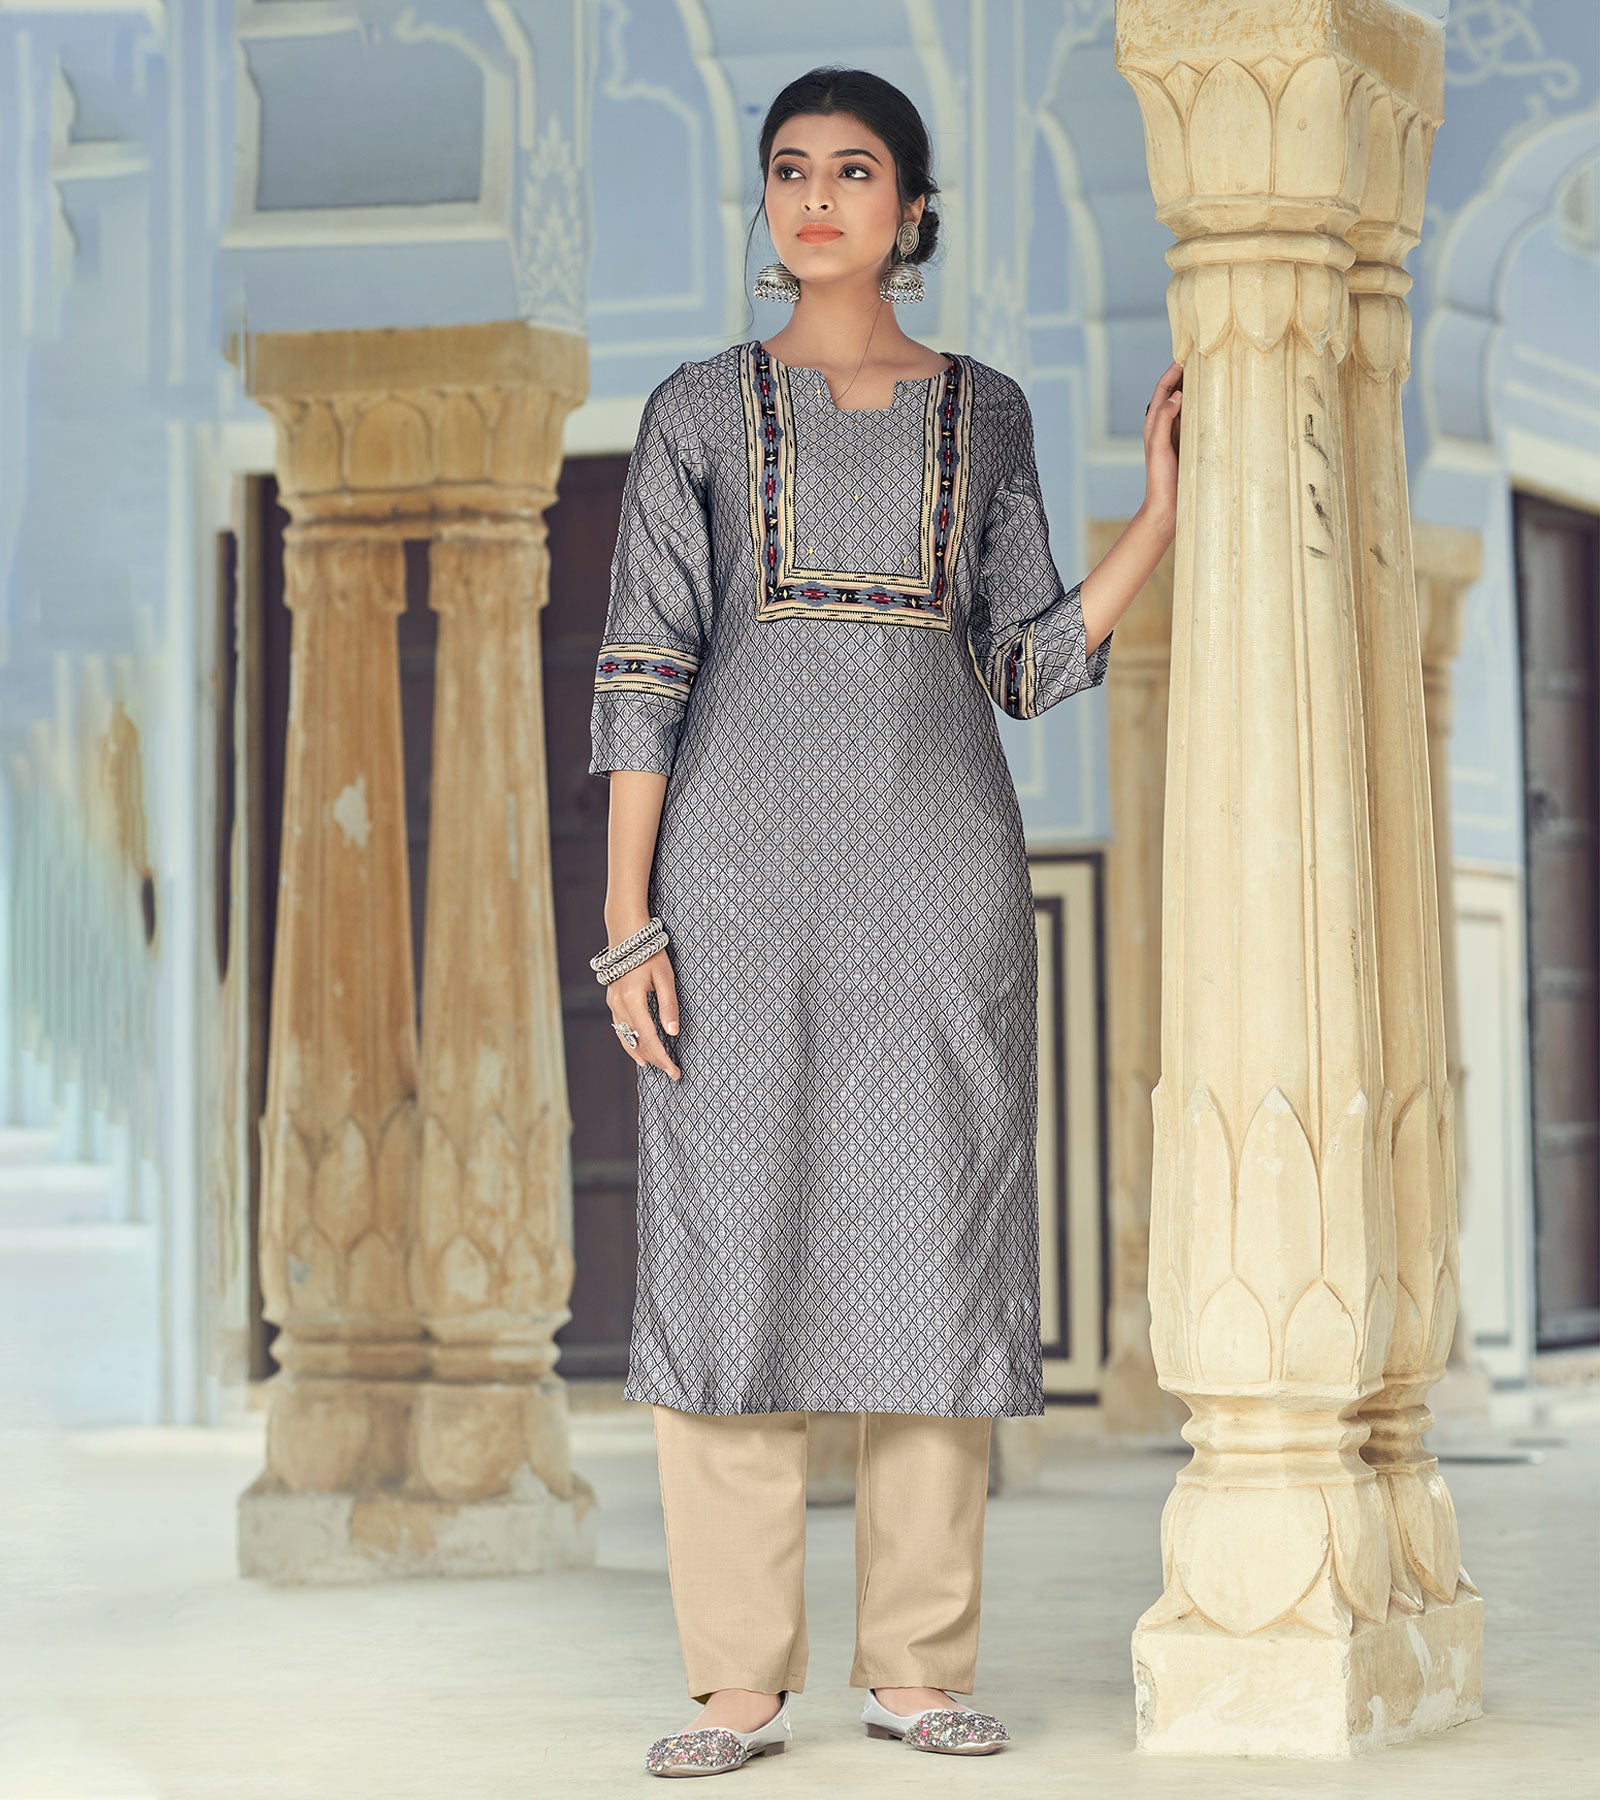 Buy Online Aari Embroidered Kurtis | Embroidered Kurtis | Kashmir Box Shop  Online Aari Embroidered Kurtis At Best Prices. Free Shipping. Worldwide  Shipping. Easy Returns. – KashmirBox.com